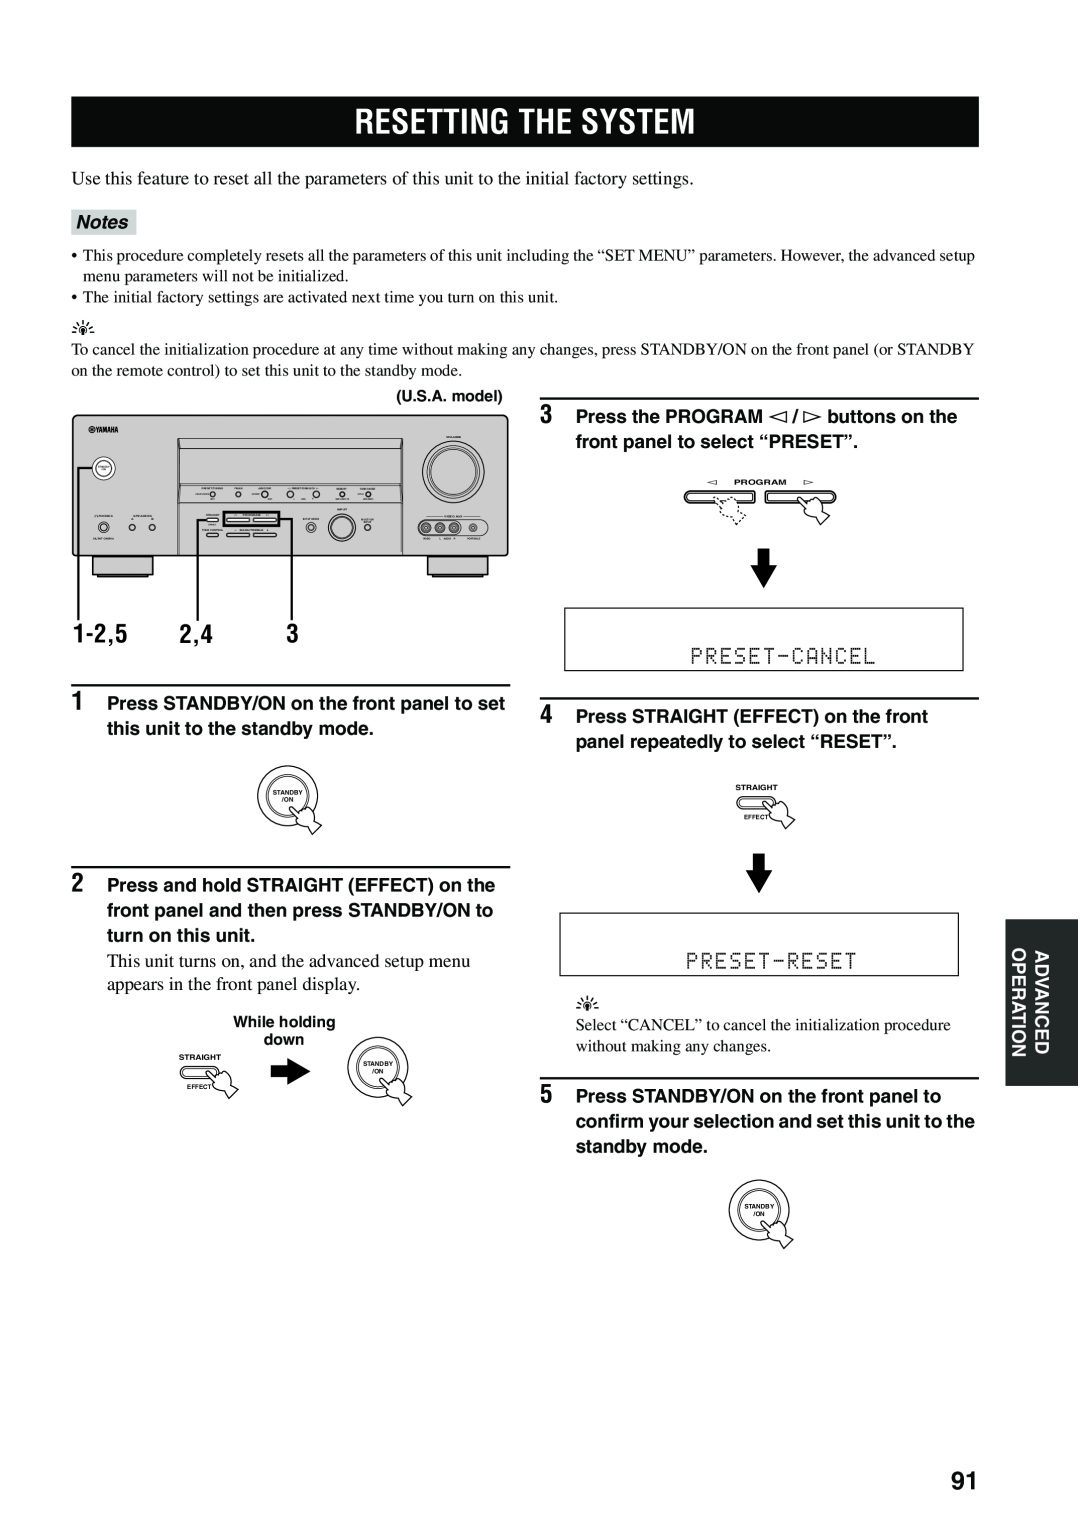 Yamaha HTR-5940 owner manual Resetting The System, 1-2,5, Preset-Reset, Preset-Cancel, Notes 